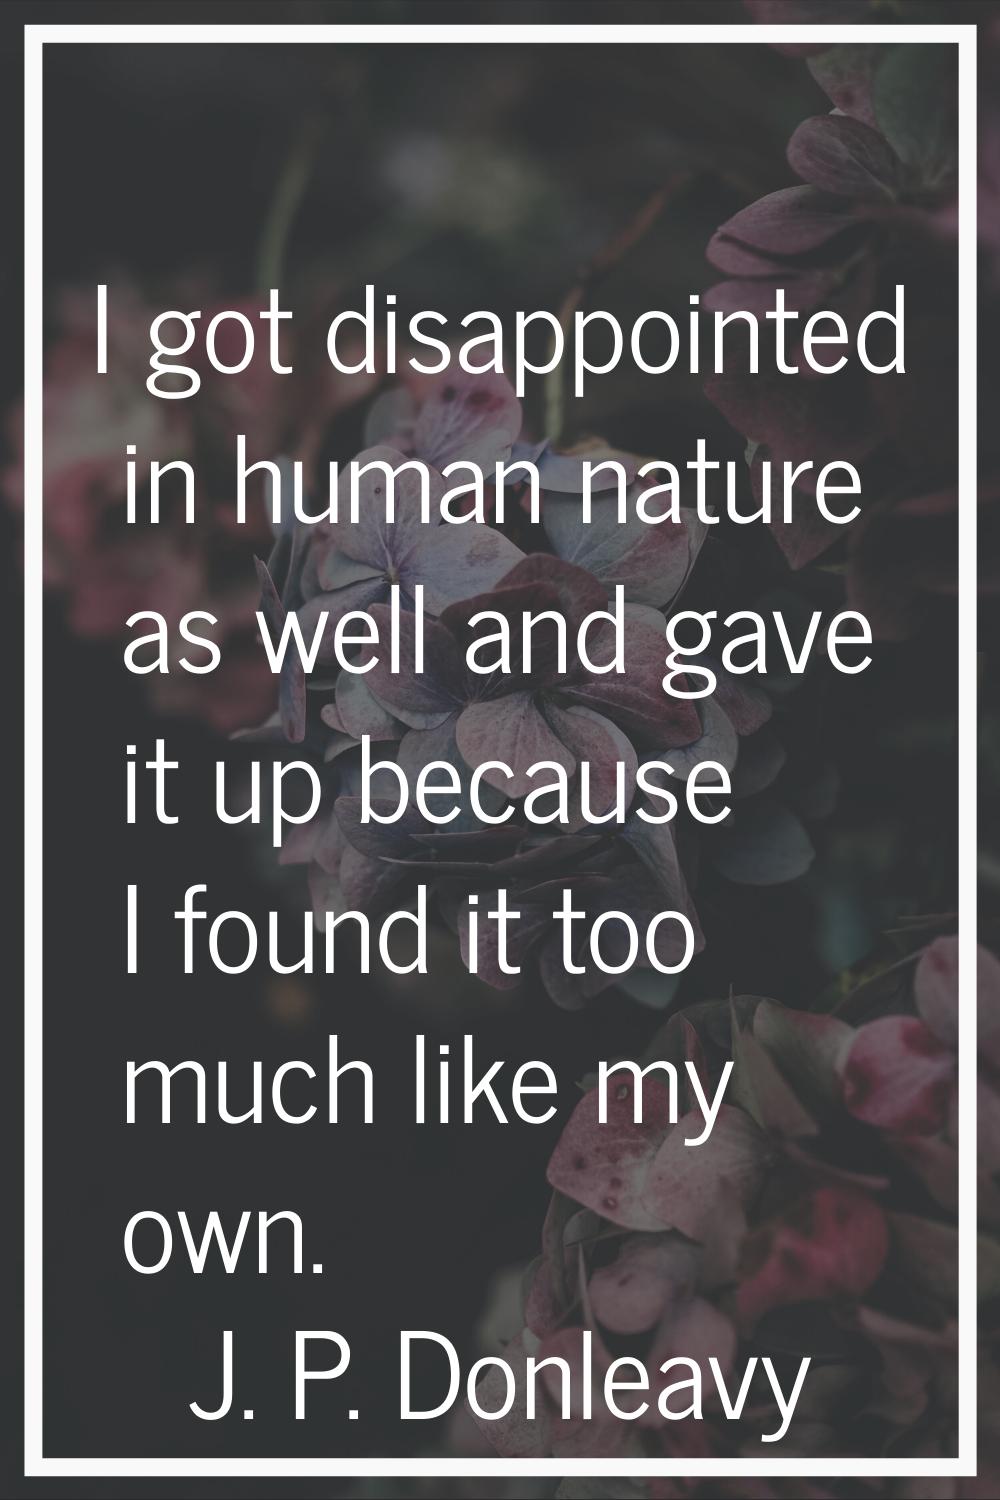 I got disappointed in human nature as well and gave it up because I found it too much like my own.